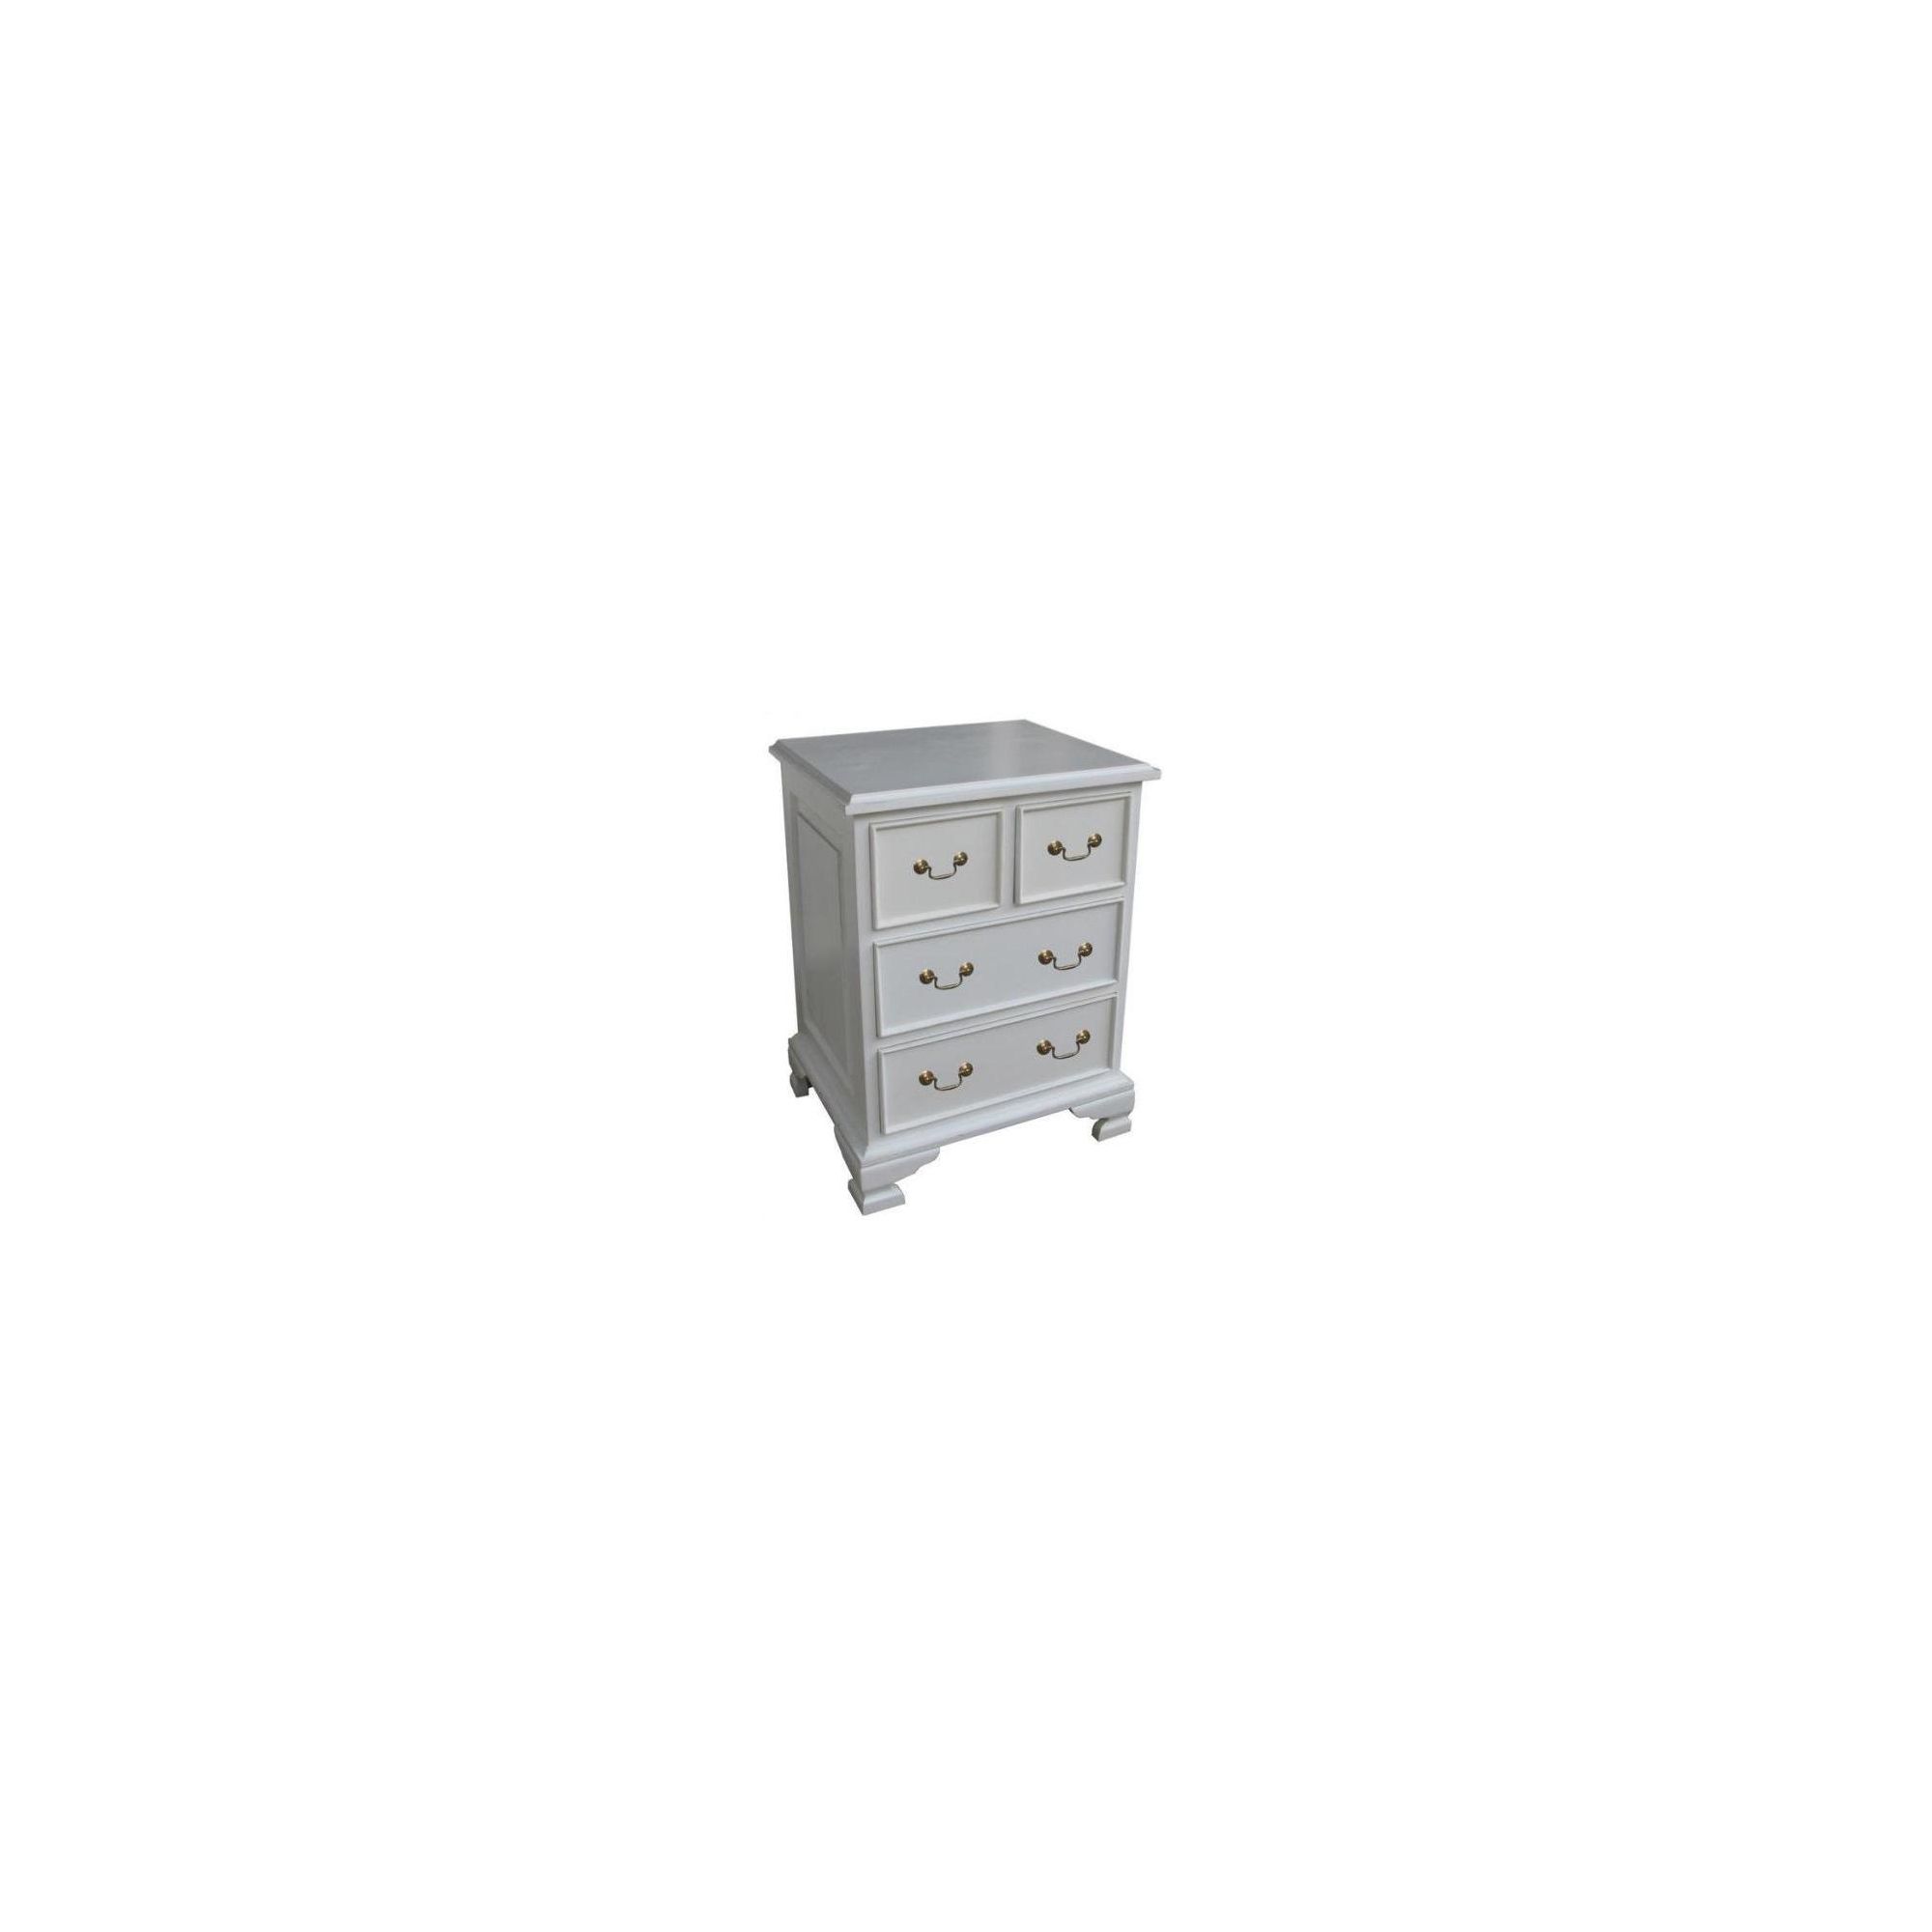 Lock stock and barrel Mahogany 4 Drawer Bedside Table in Mahogany - Antique White at Tesco Direct